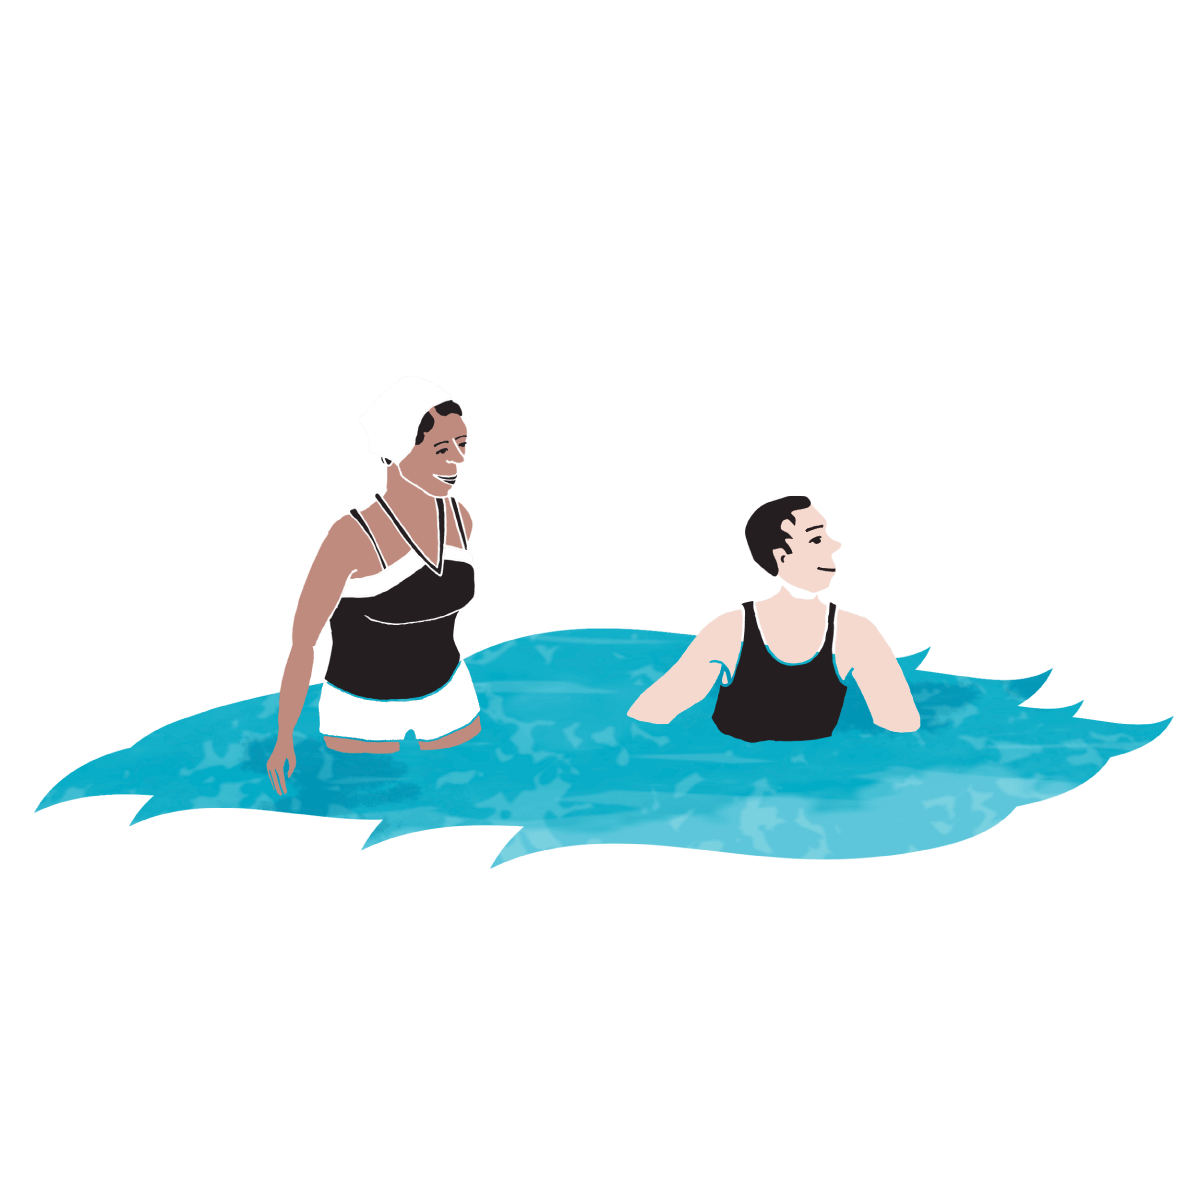 two characters in historic swimwear standing in the river